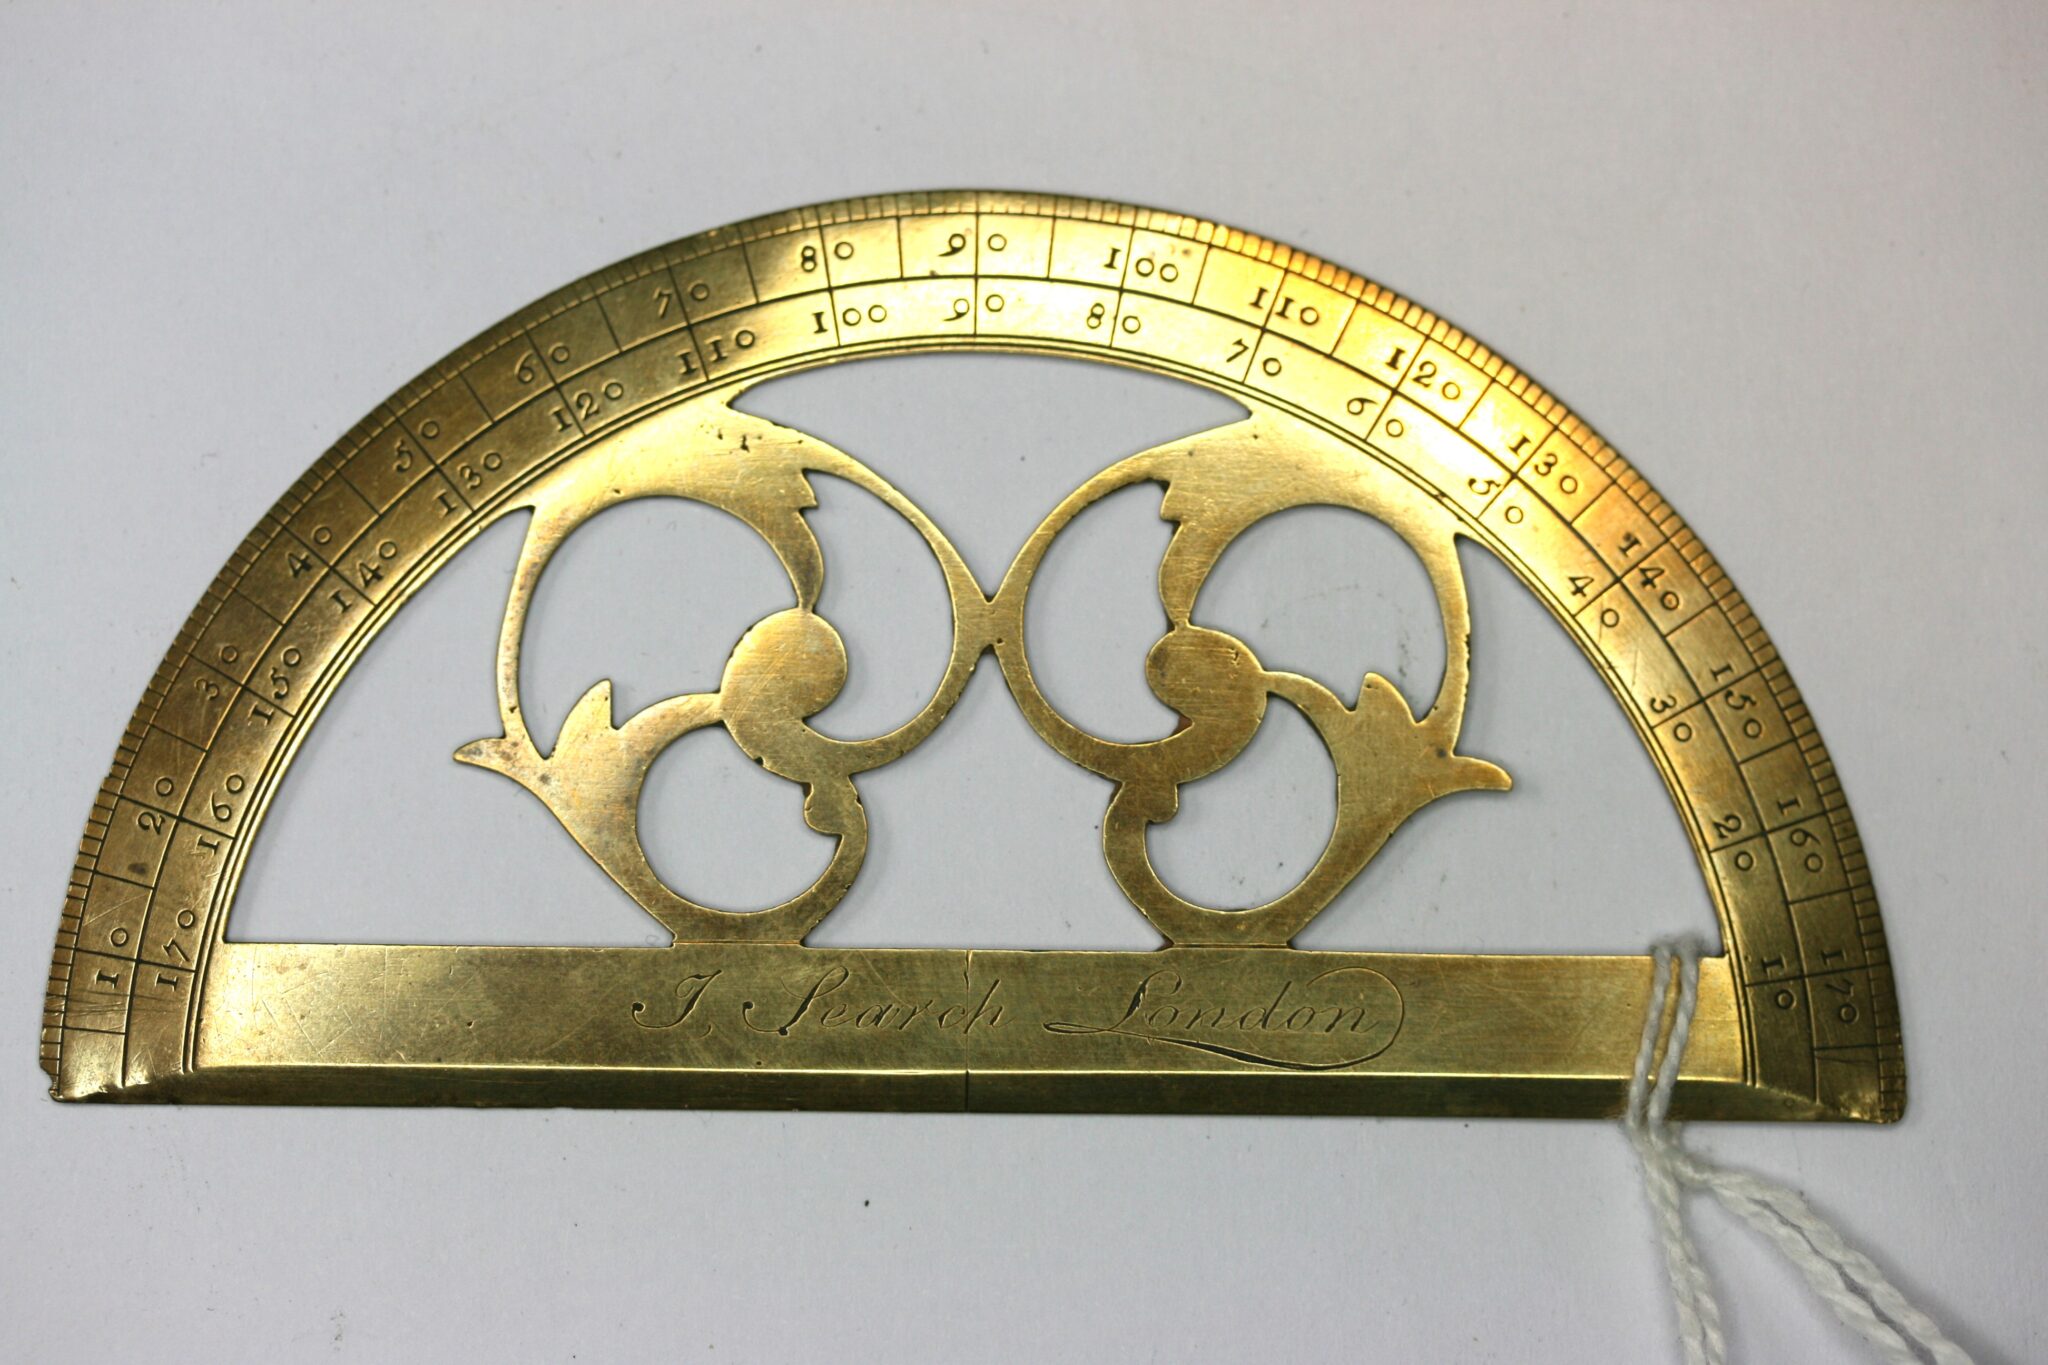 J.SEARCH BRASS PROTRACTOR, 18th CENTURY , GOOD COND. DIAMETER 4 IN. ( 110mm )